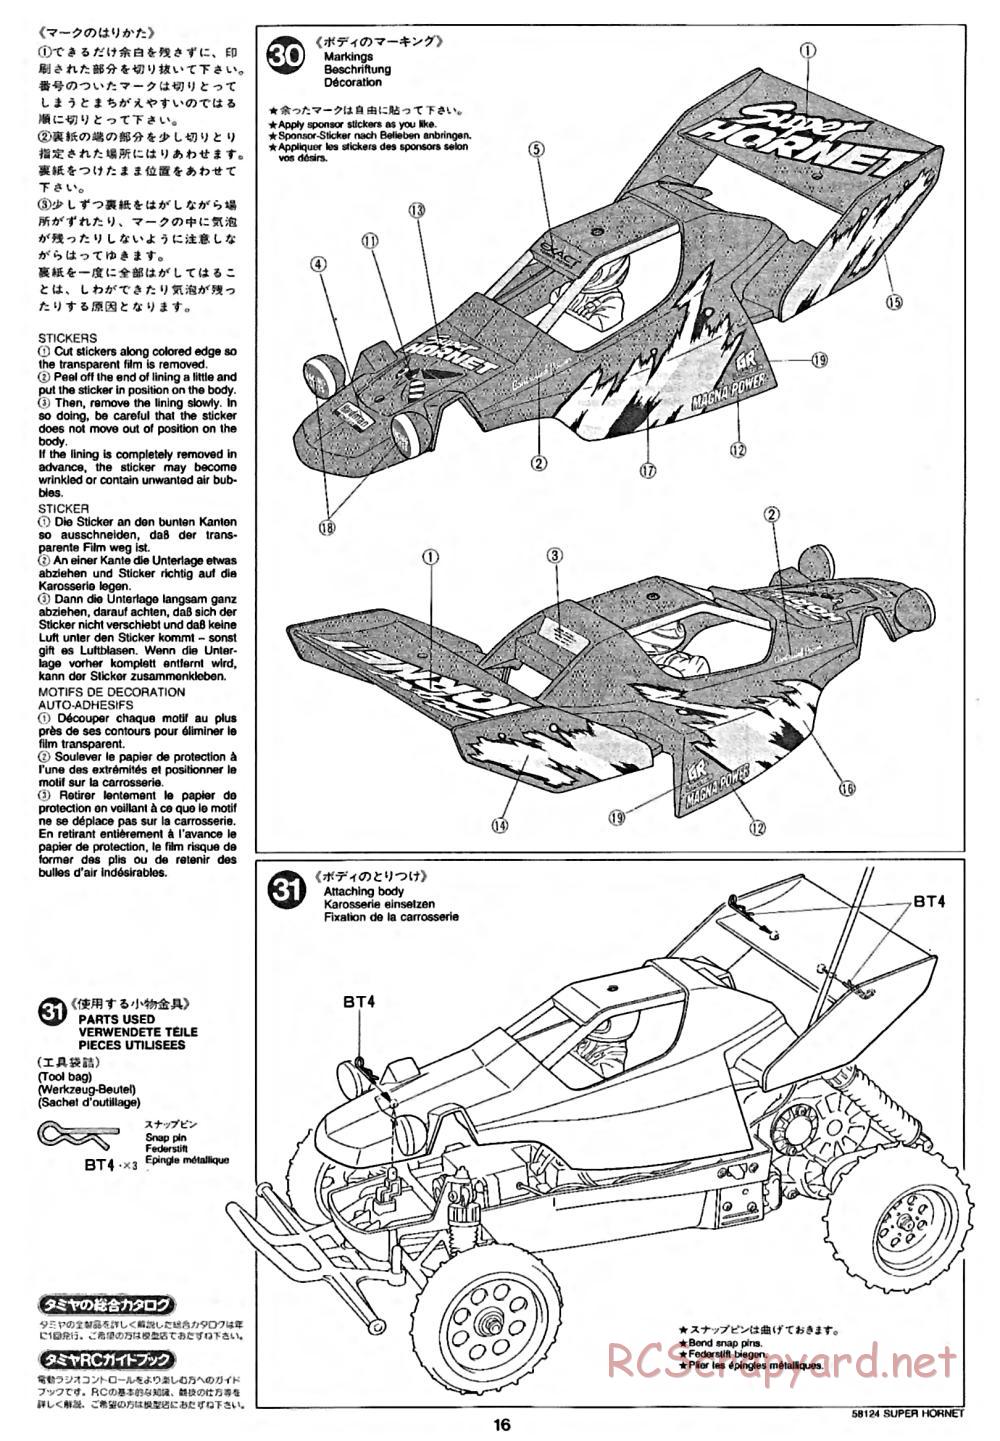 Tamiya - Super Hornet Chassis - Manual - Page 16